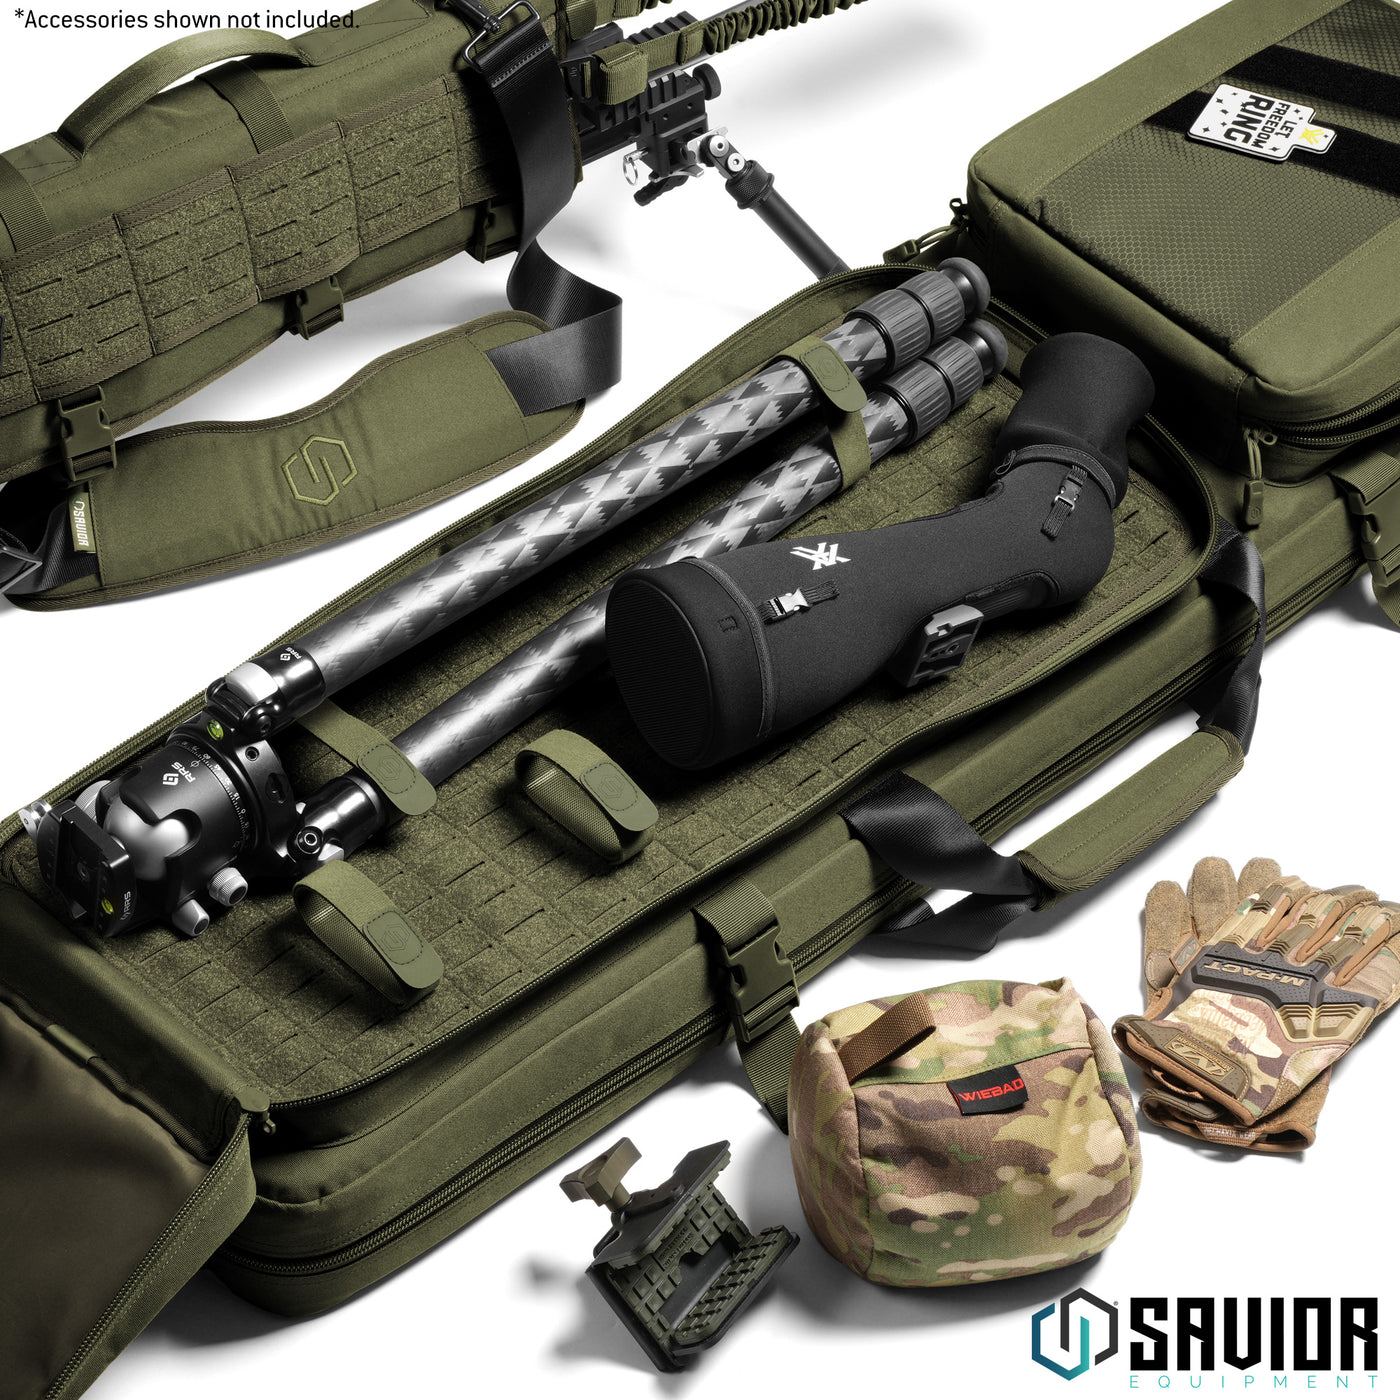 Finishing Touches - This bag isn't complete without space for your tripods. Don't use tripods? Toss in your shooting bags or attach on some MOLLE pouches. There's capacity for it all. Lock & accessories shown not included.